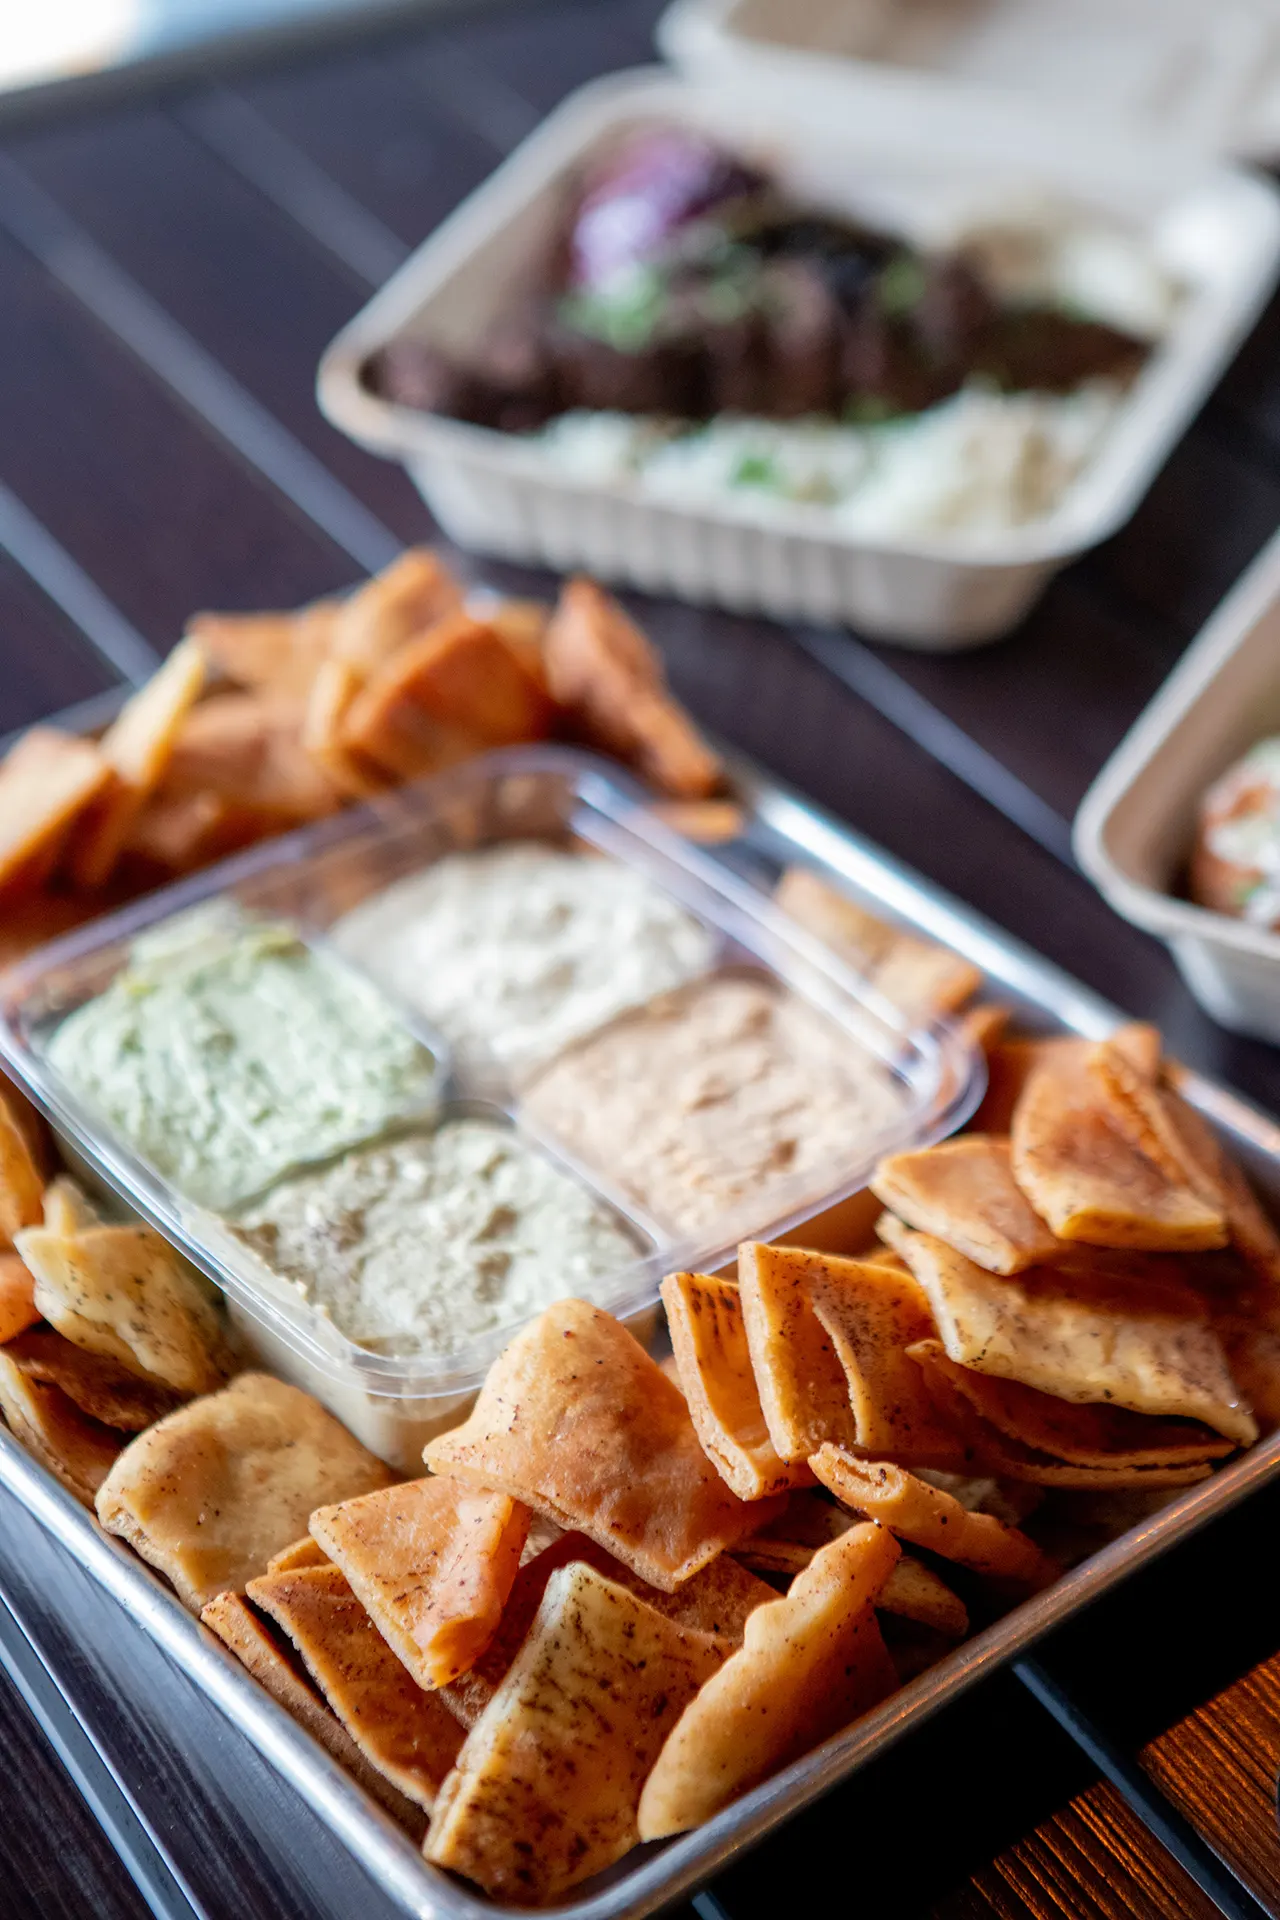 The Party Pack is served with Classic Hummus, Cilantro Jalapeño Hummus, Roasted Tomato Habanero Hummus, and Cumin Lime Hummus. The Party Pack container is centered on a large rectangular metallic tray and is surrounded by fresh pita chips. The tray is placed on a black metallic table and accompanied by a Chicken Kabab platter and a Beef Kafta Kabab platter that are blurred in the background.